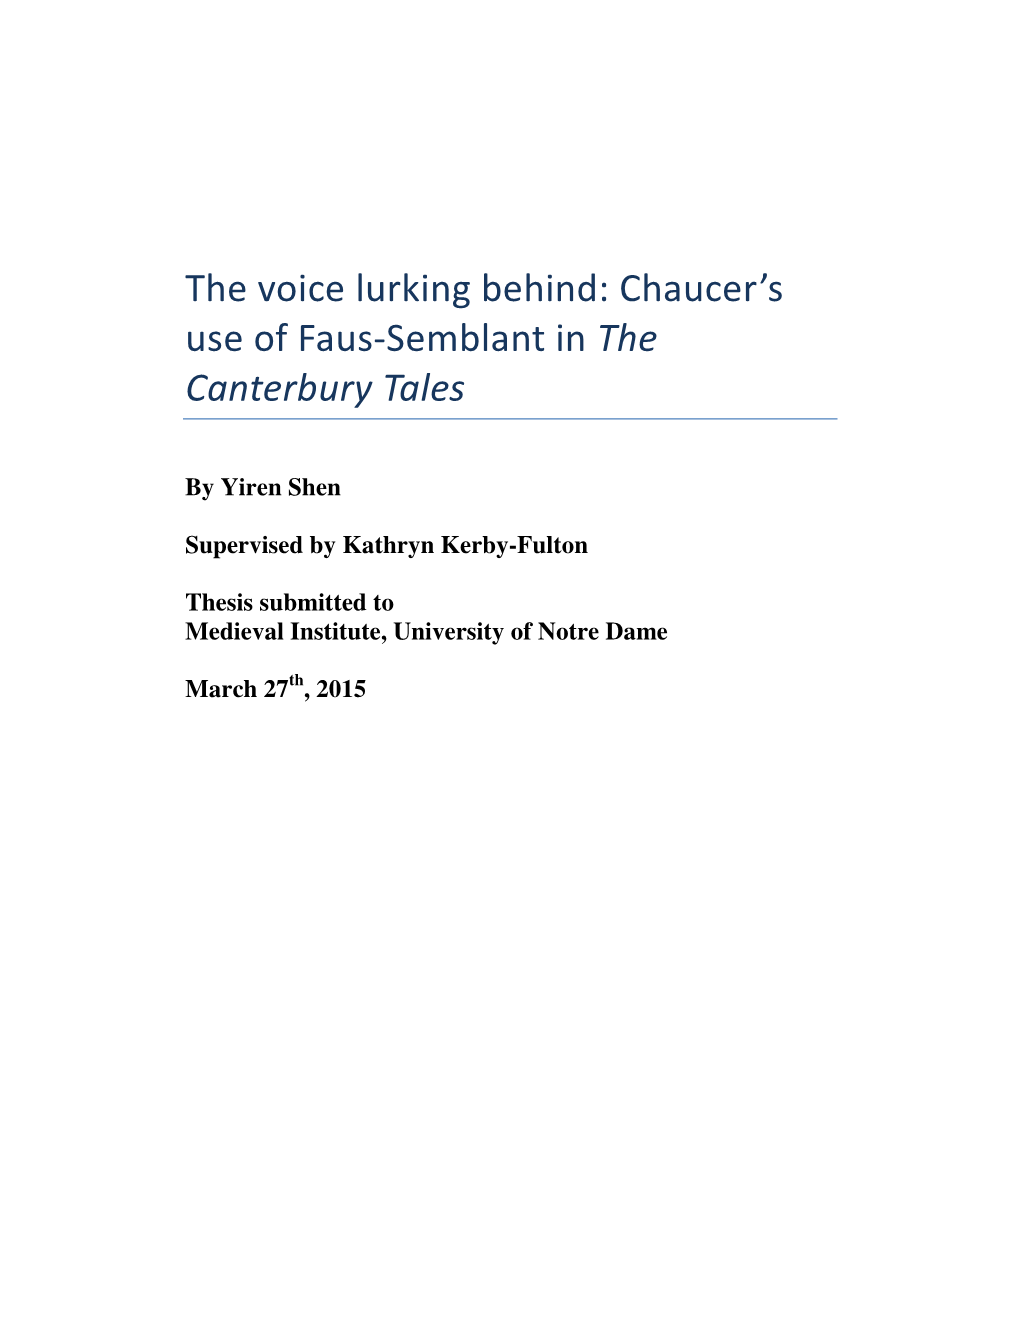 Chaucer's Use of Faus-Semblant in the Canterbury Tales